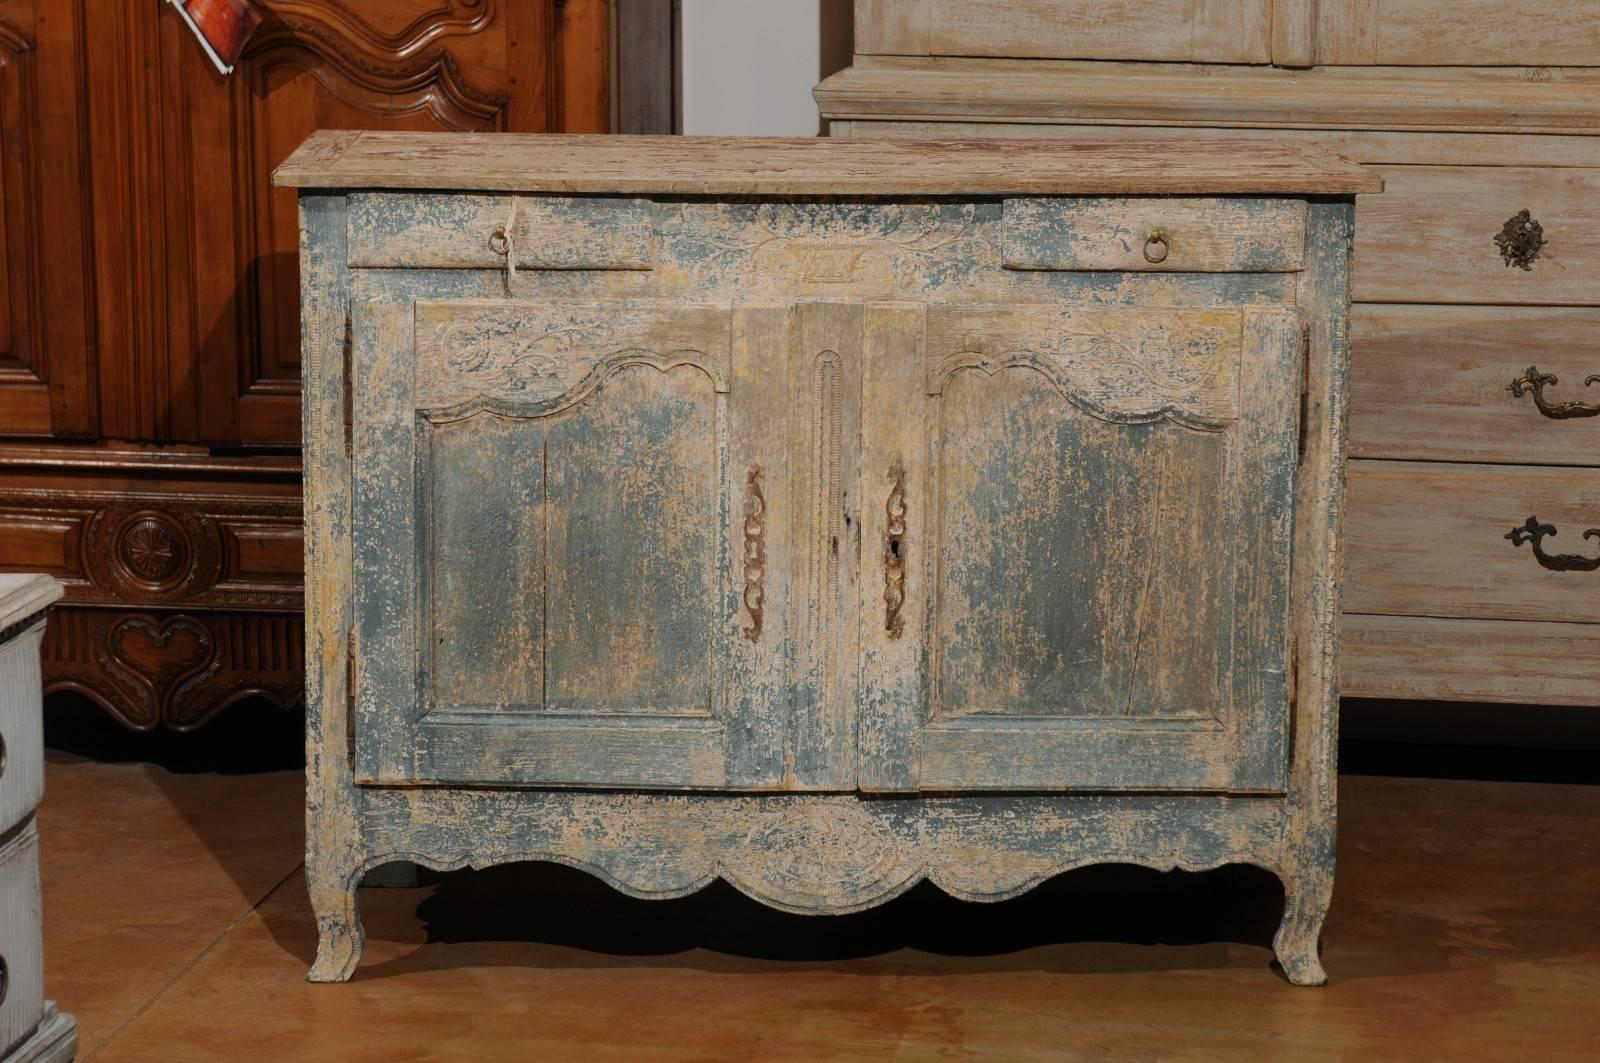 A French Louis XV style painted wood two-door, two-drawer buffet with floral motifs and distressed finish from the early 19th century. Born in the early years of the 19th century, at a time when Bonaparte was about to crown himself emperor and